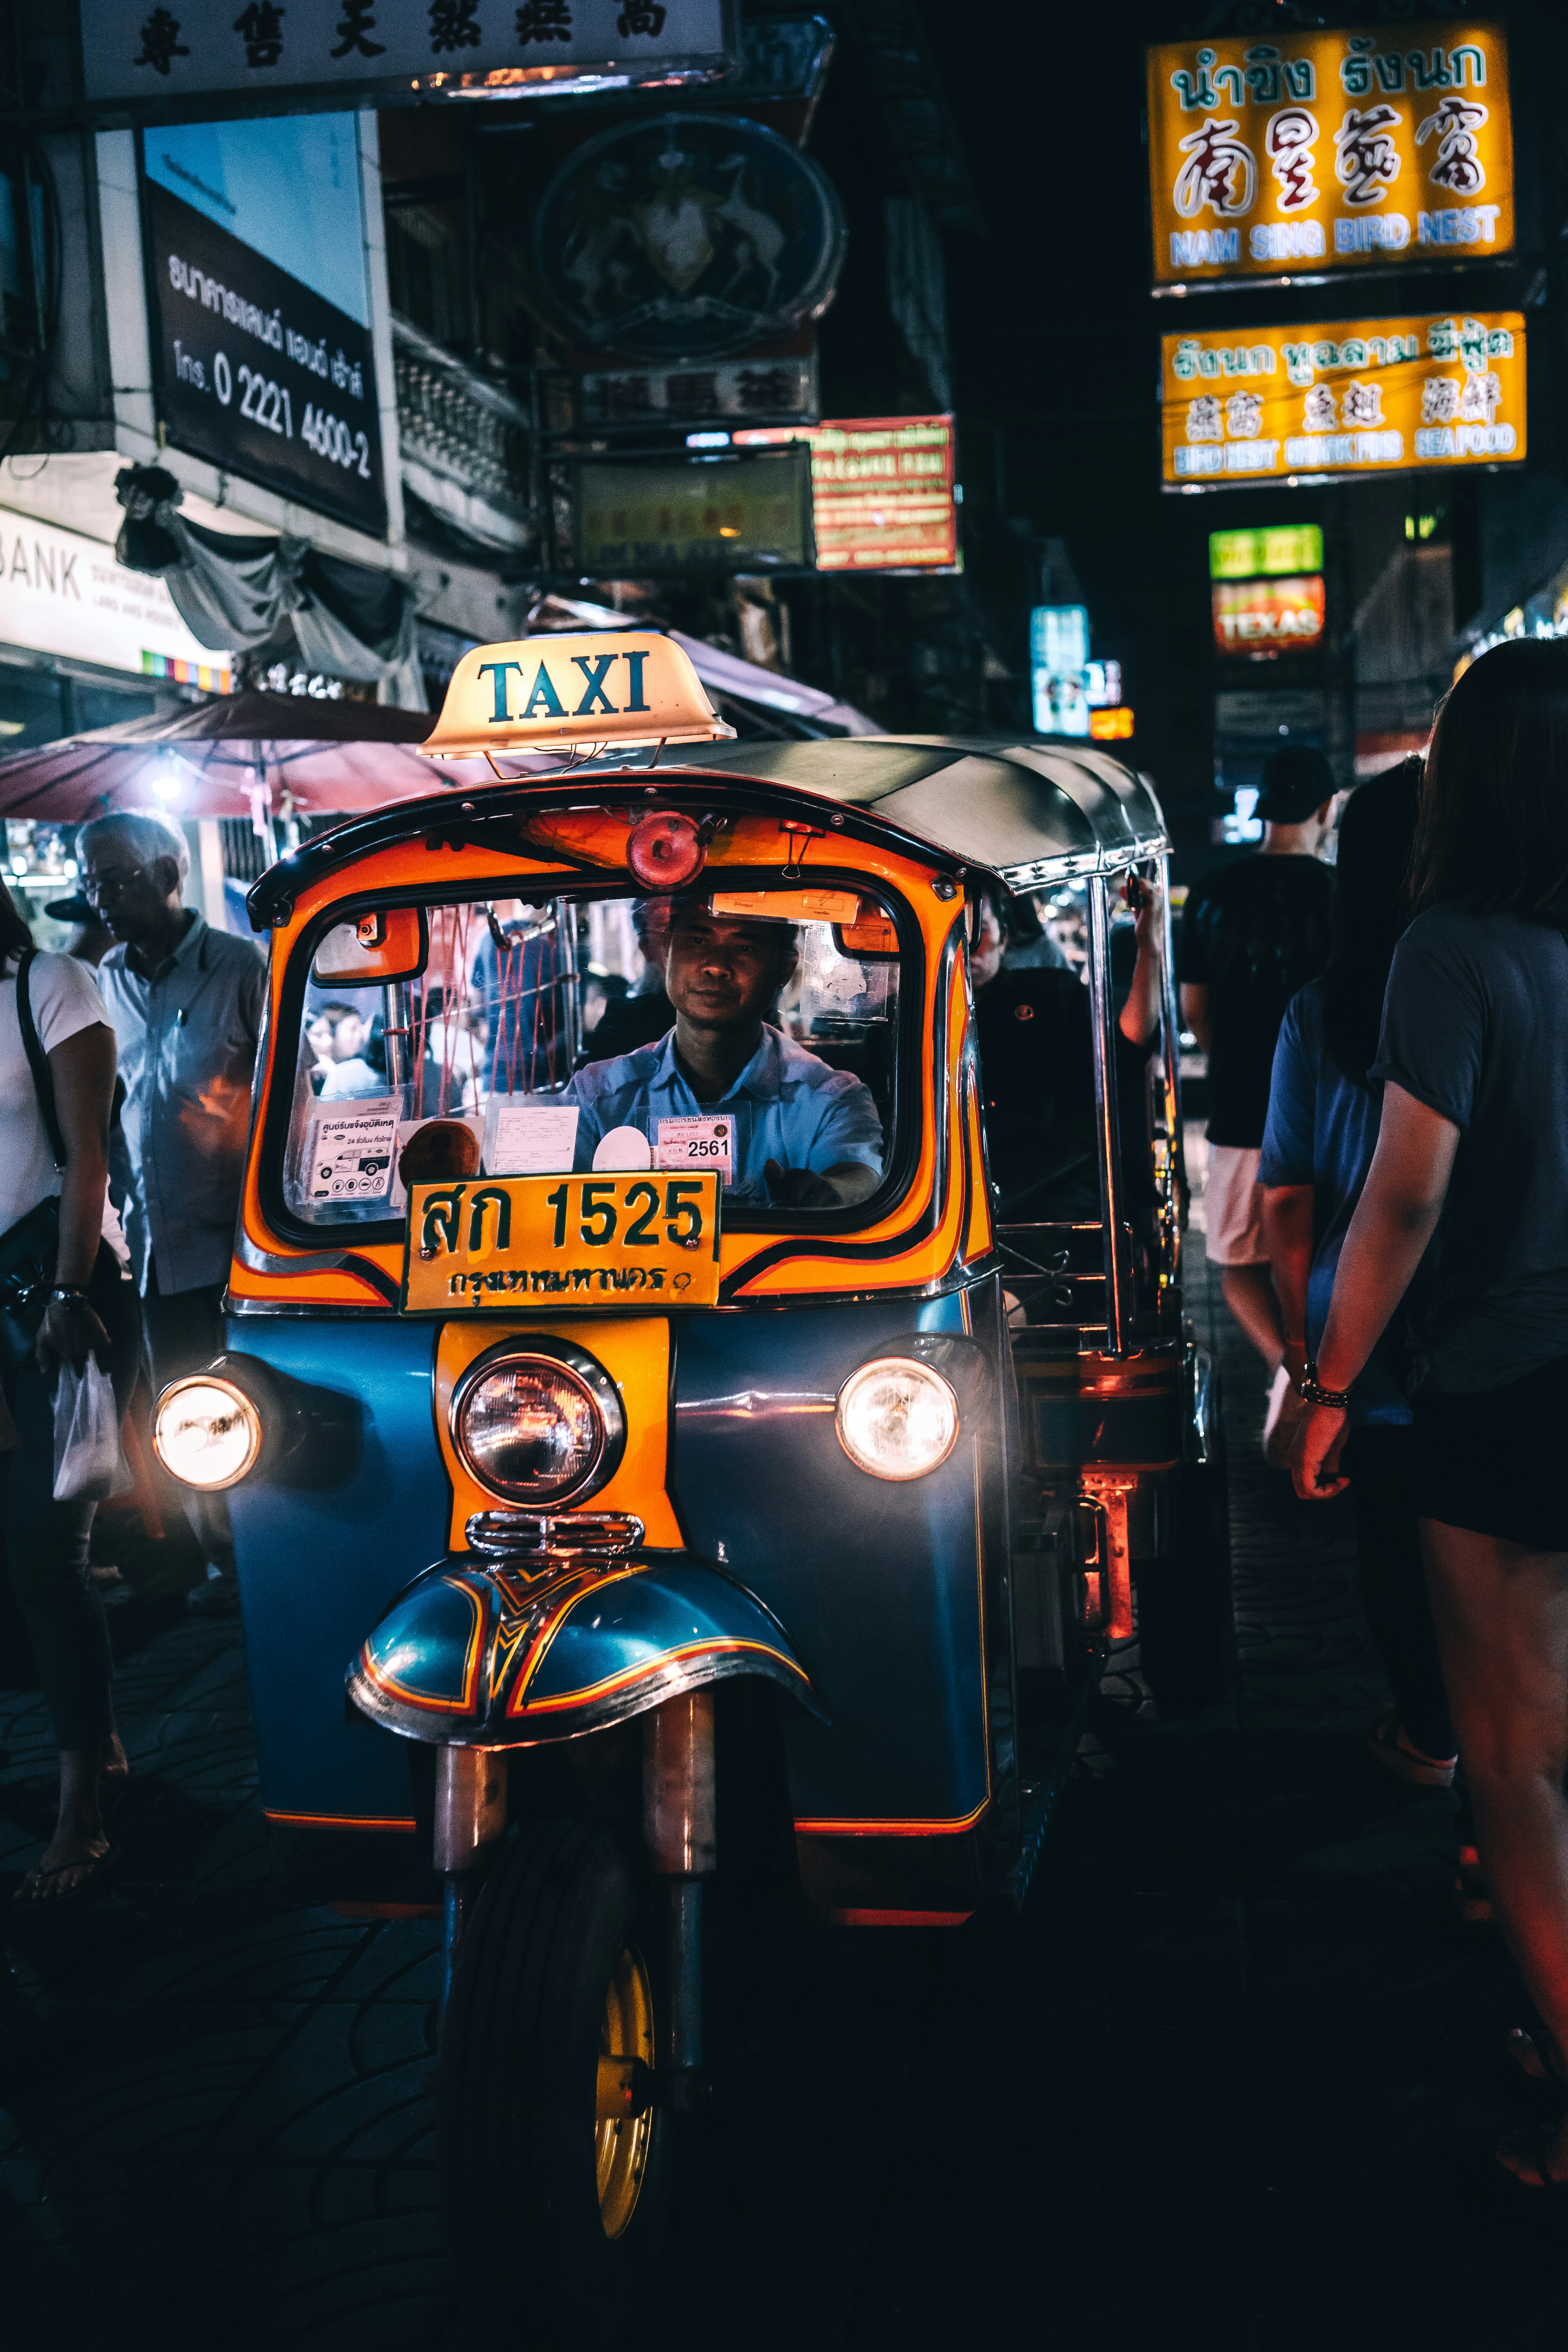 A Tuk-Tuk driver makes his way through a crowd in the busy Chinatown area of Bangkok, Thailand.